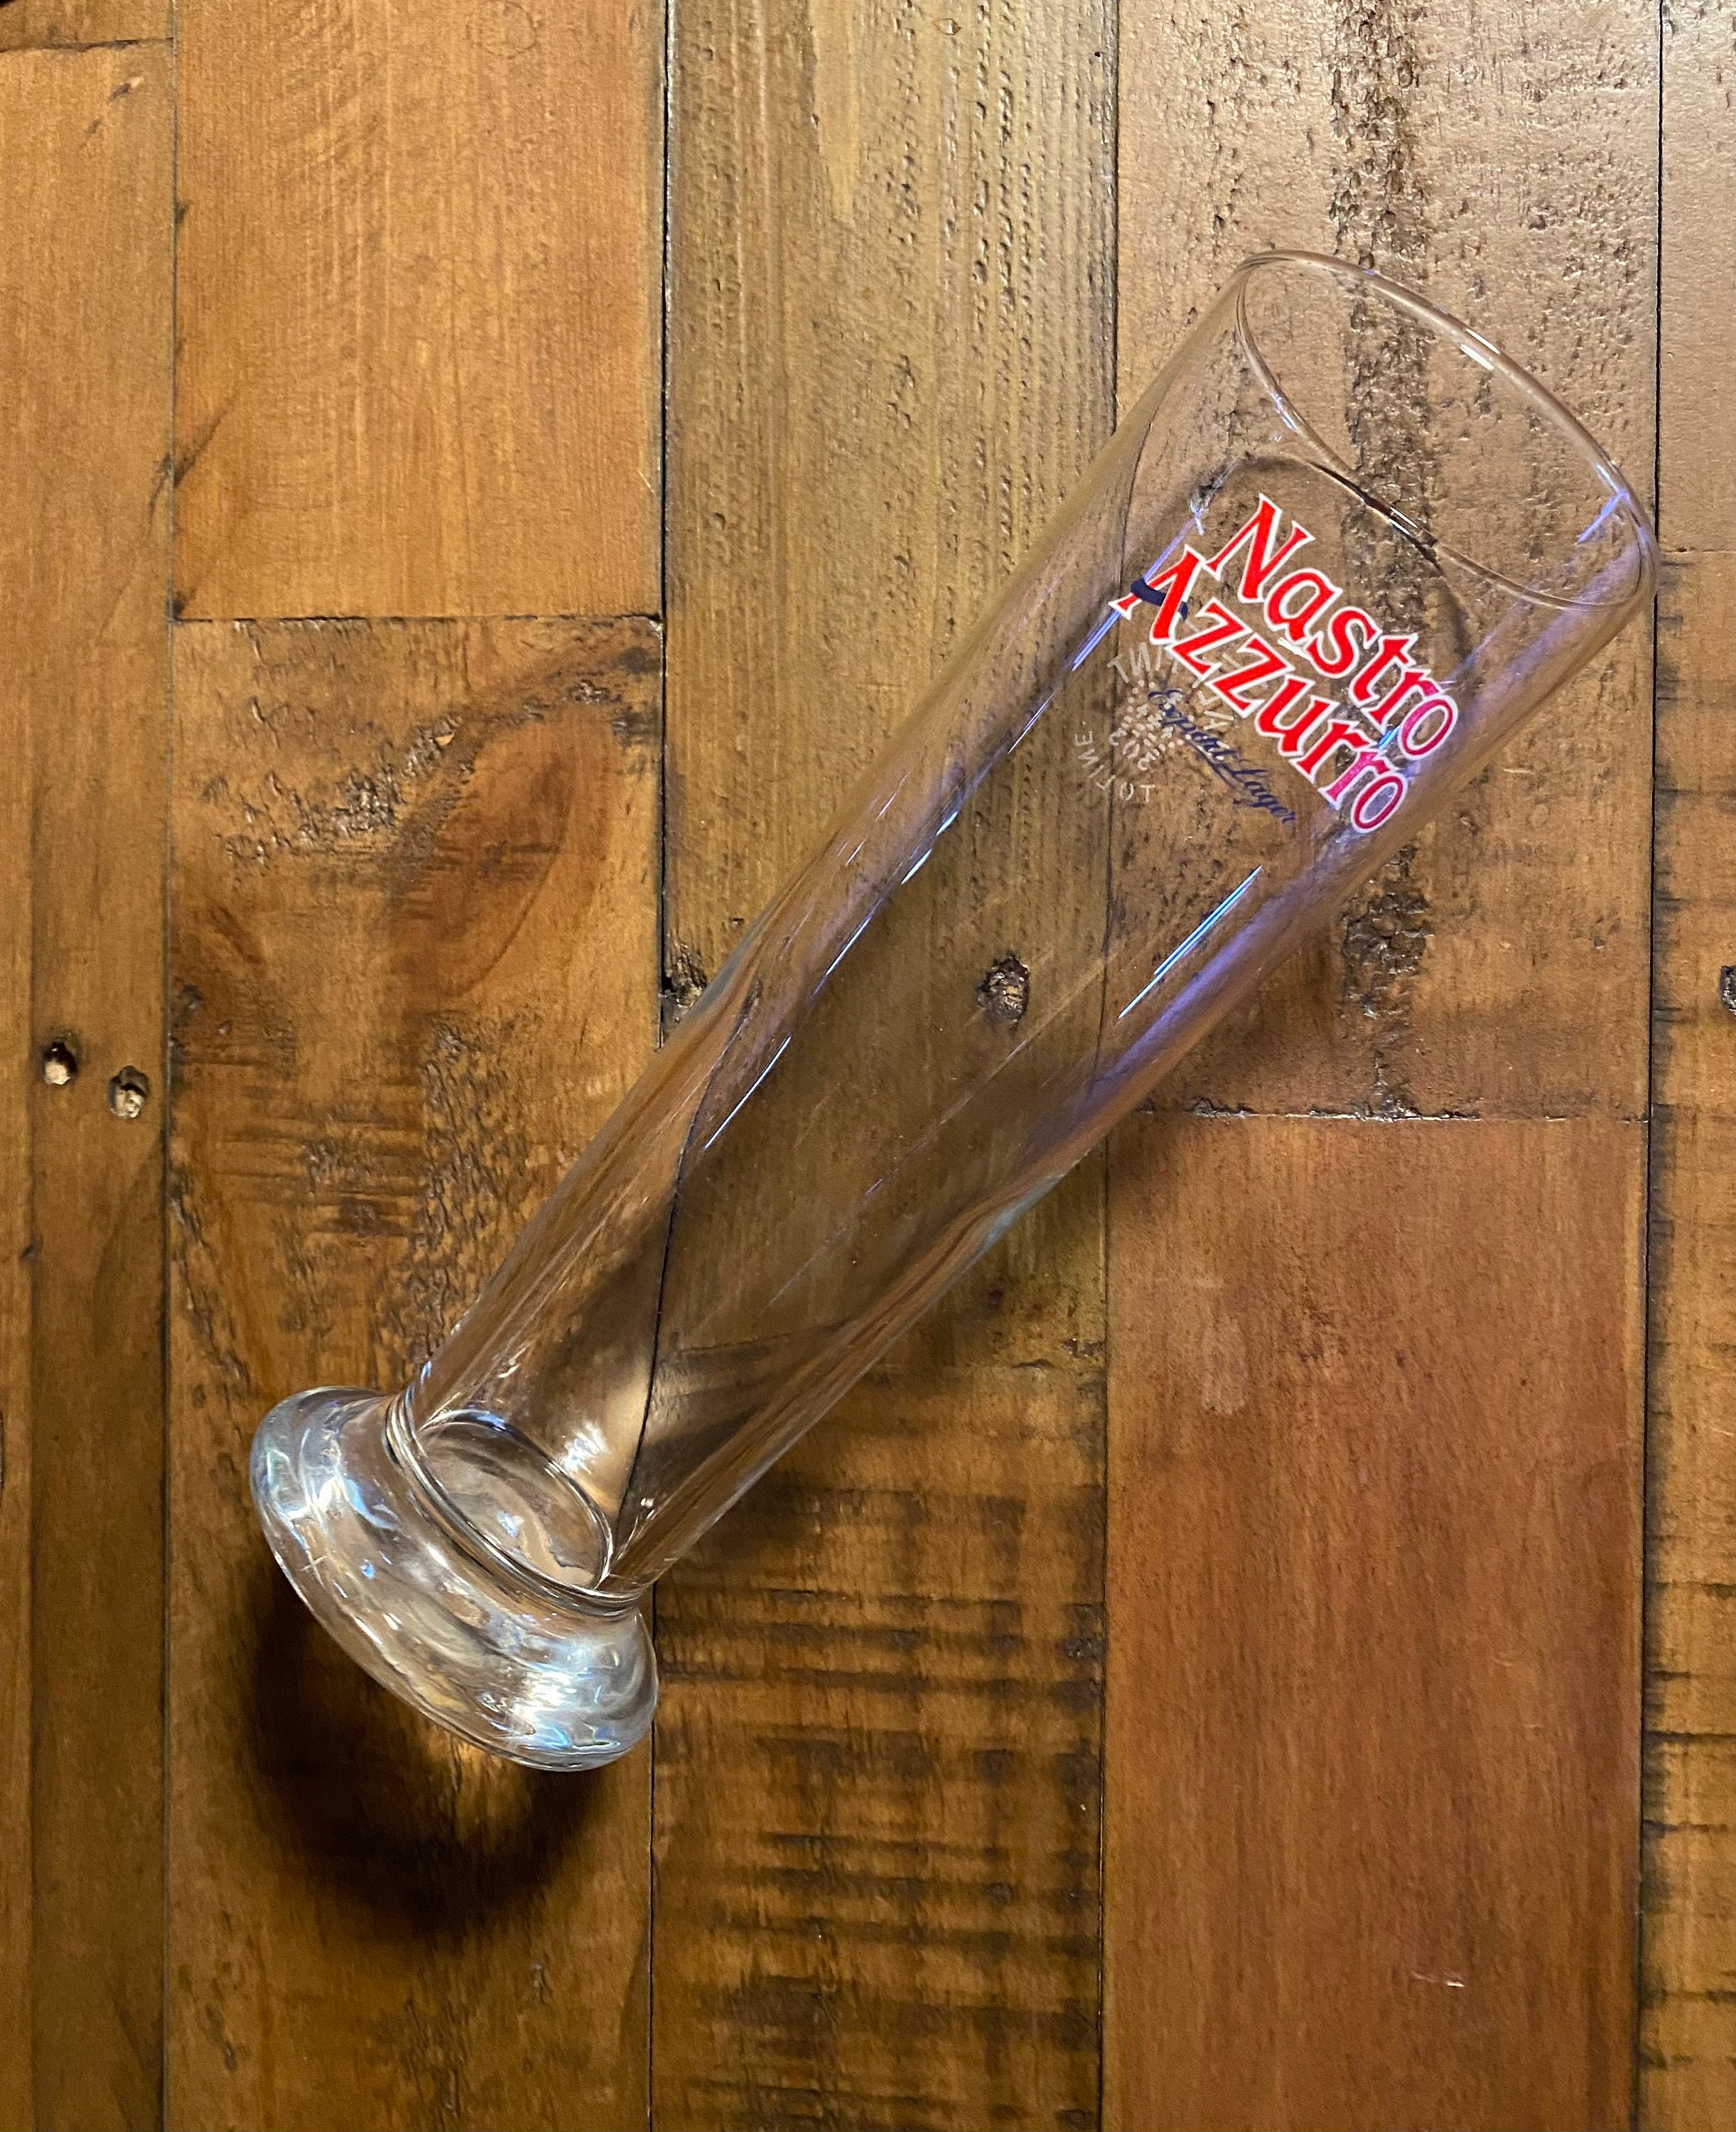 Peroni Beer Glasses for Sale in Fresno, CA - OfferUp